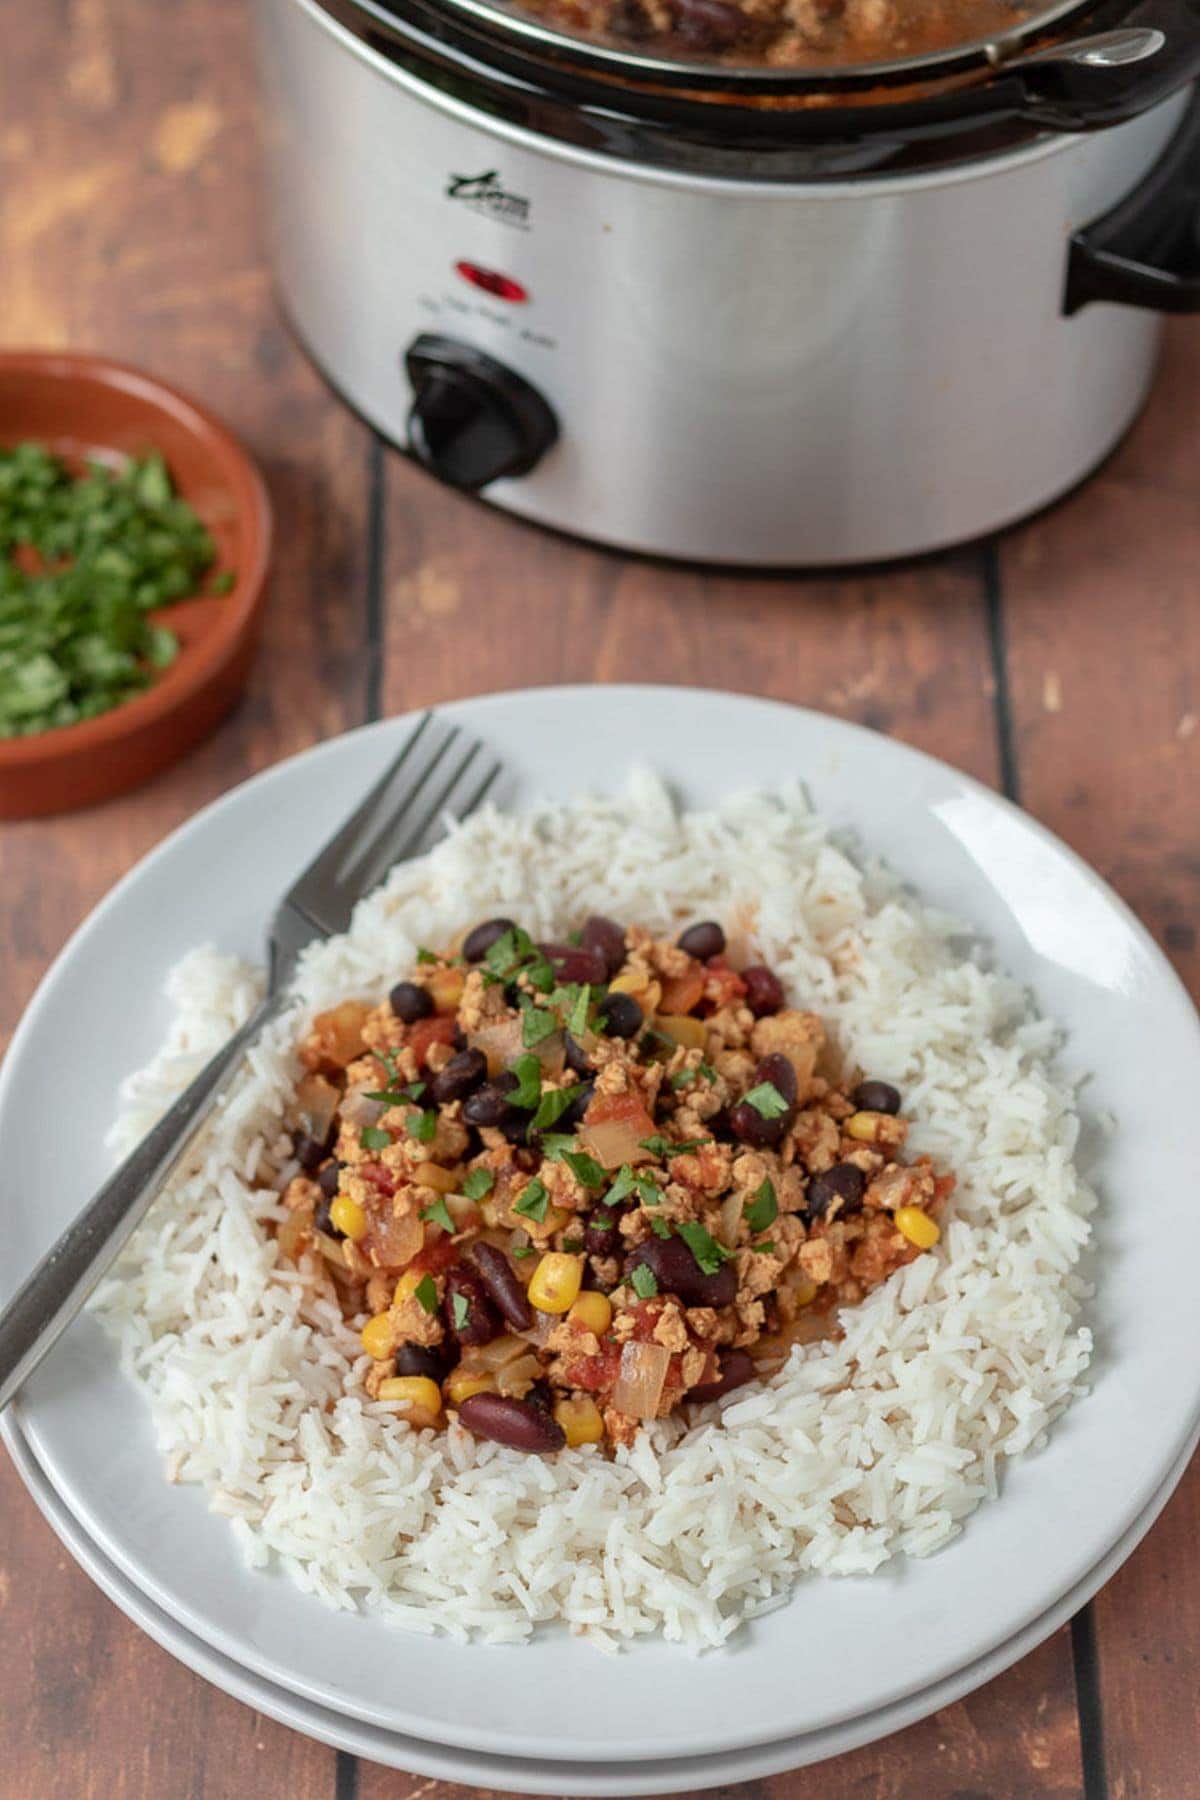 Healthy slow cooker turkey chilli on a plate served on rice and garnished with coriander. Slow cooker in the background with a dish of chopped coriander in between.